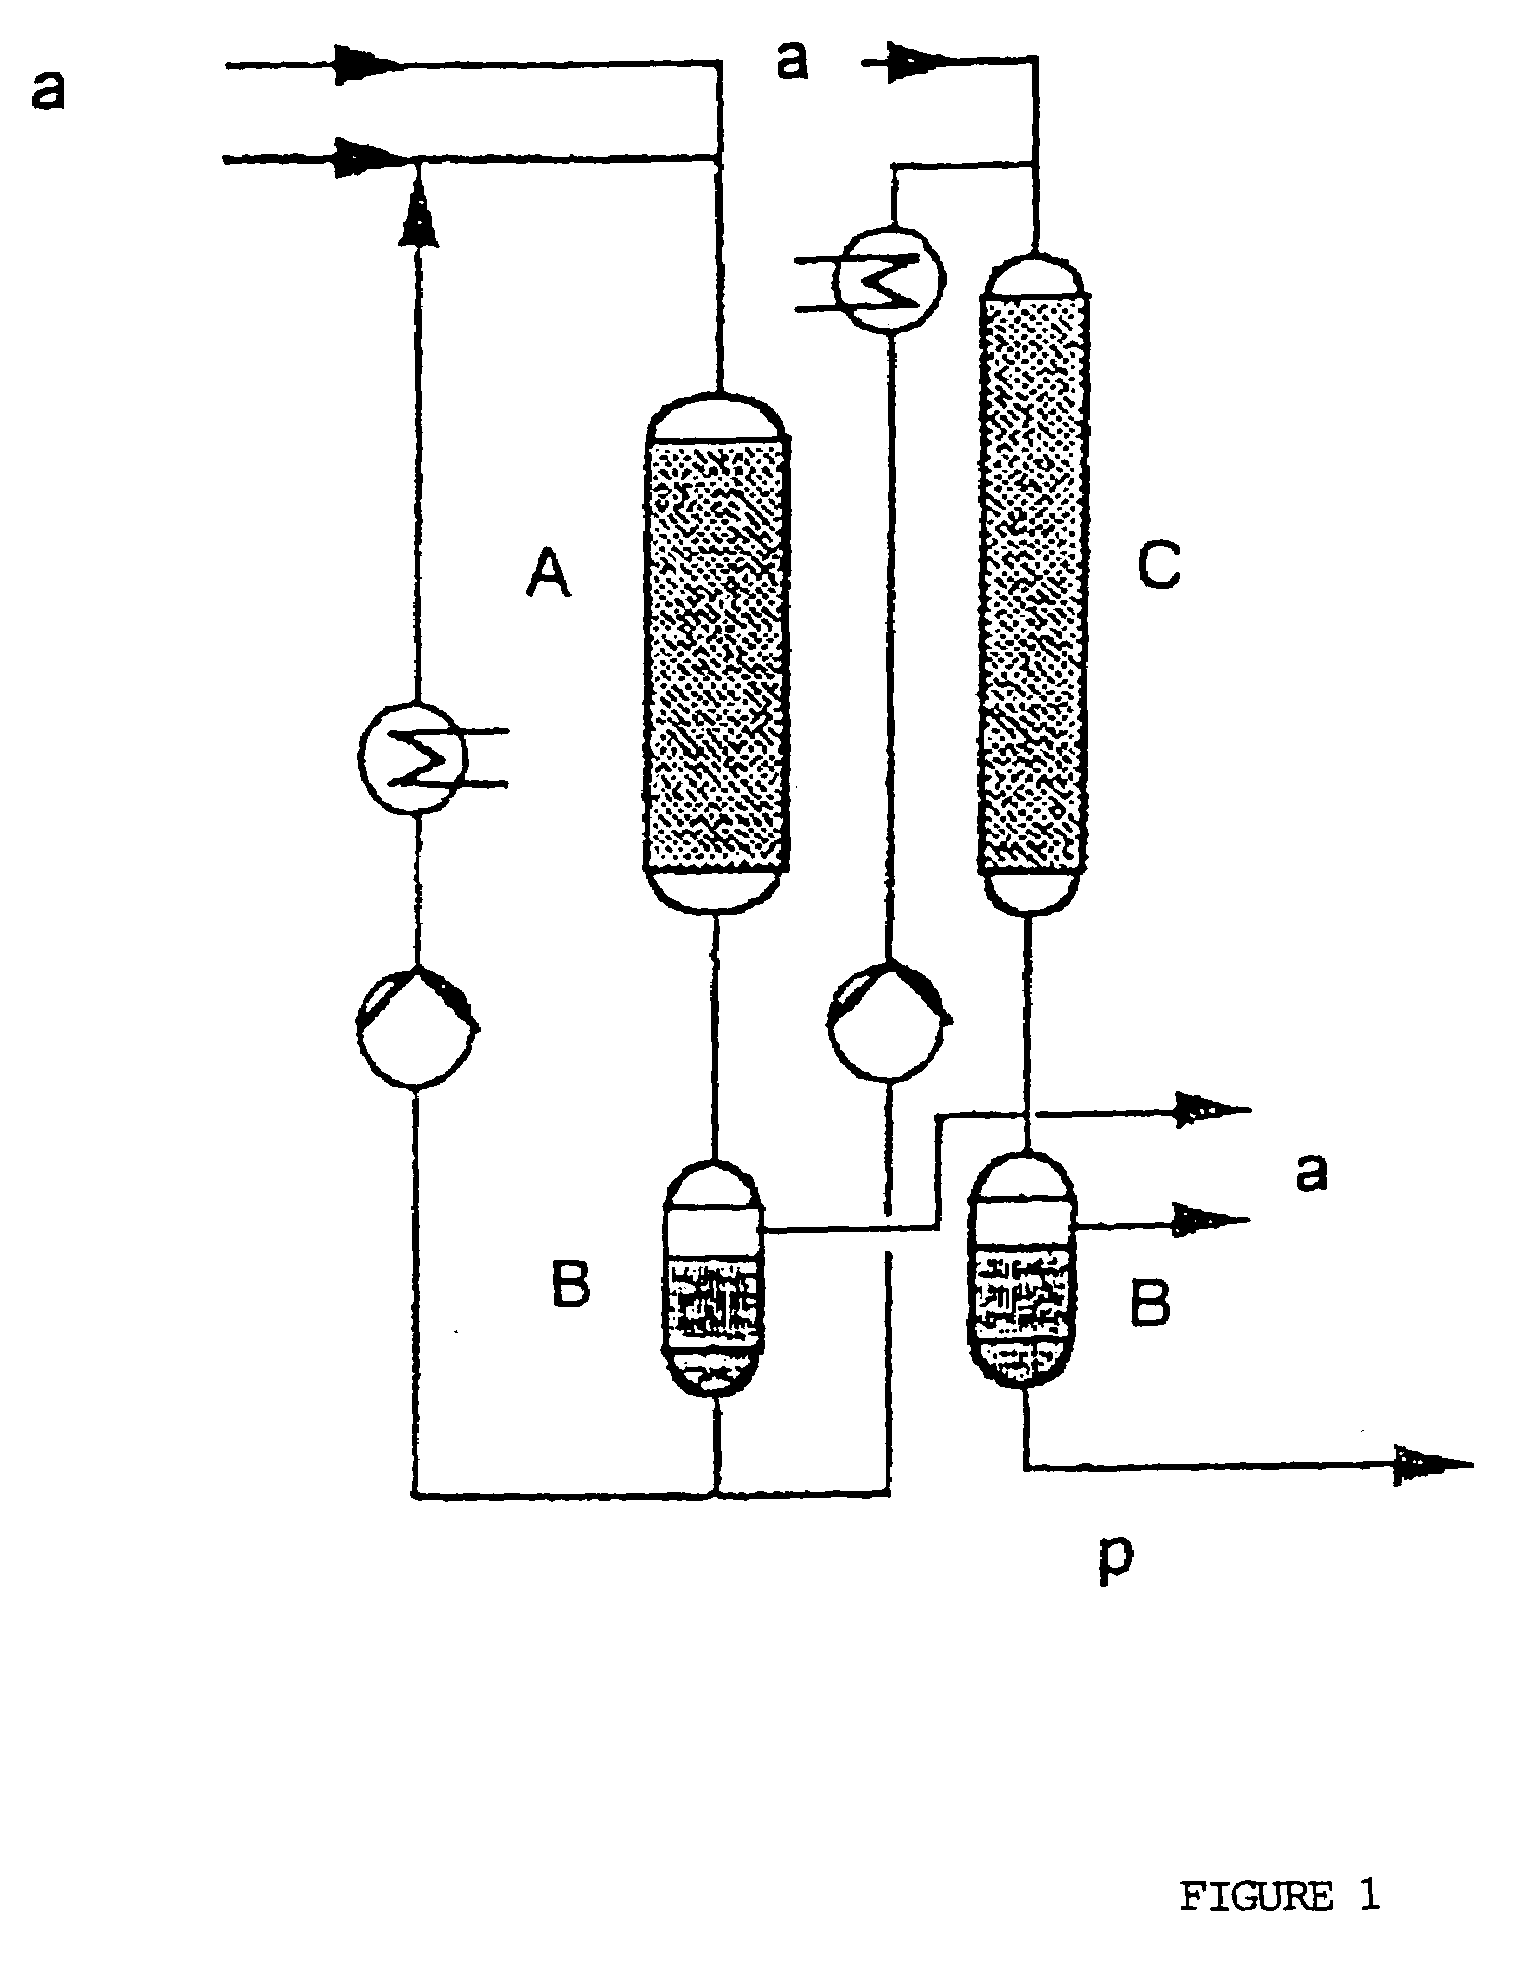 Process for the hydrogenation of acetone